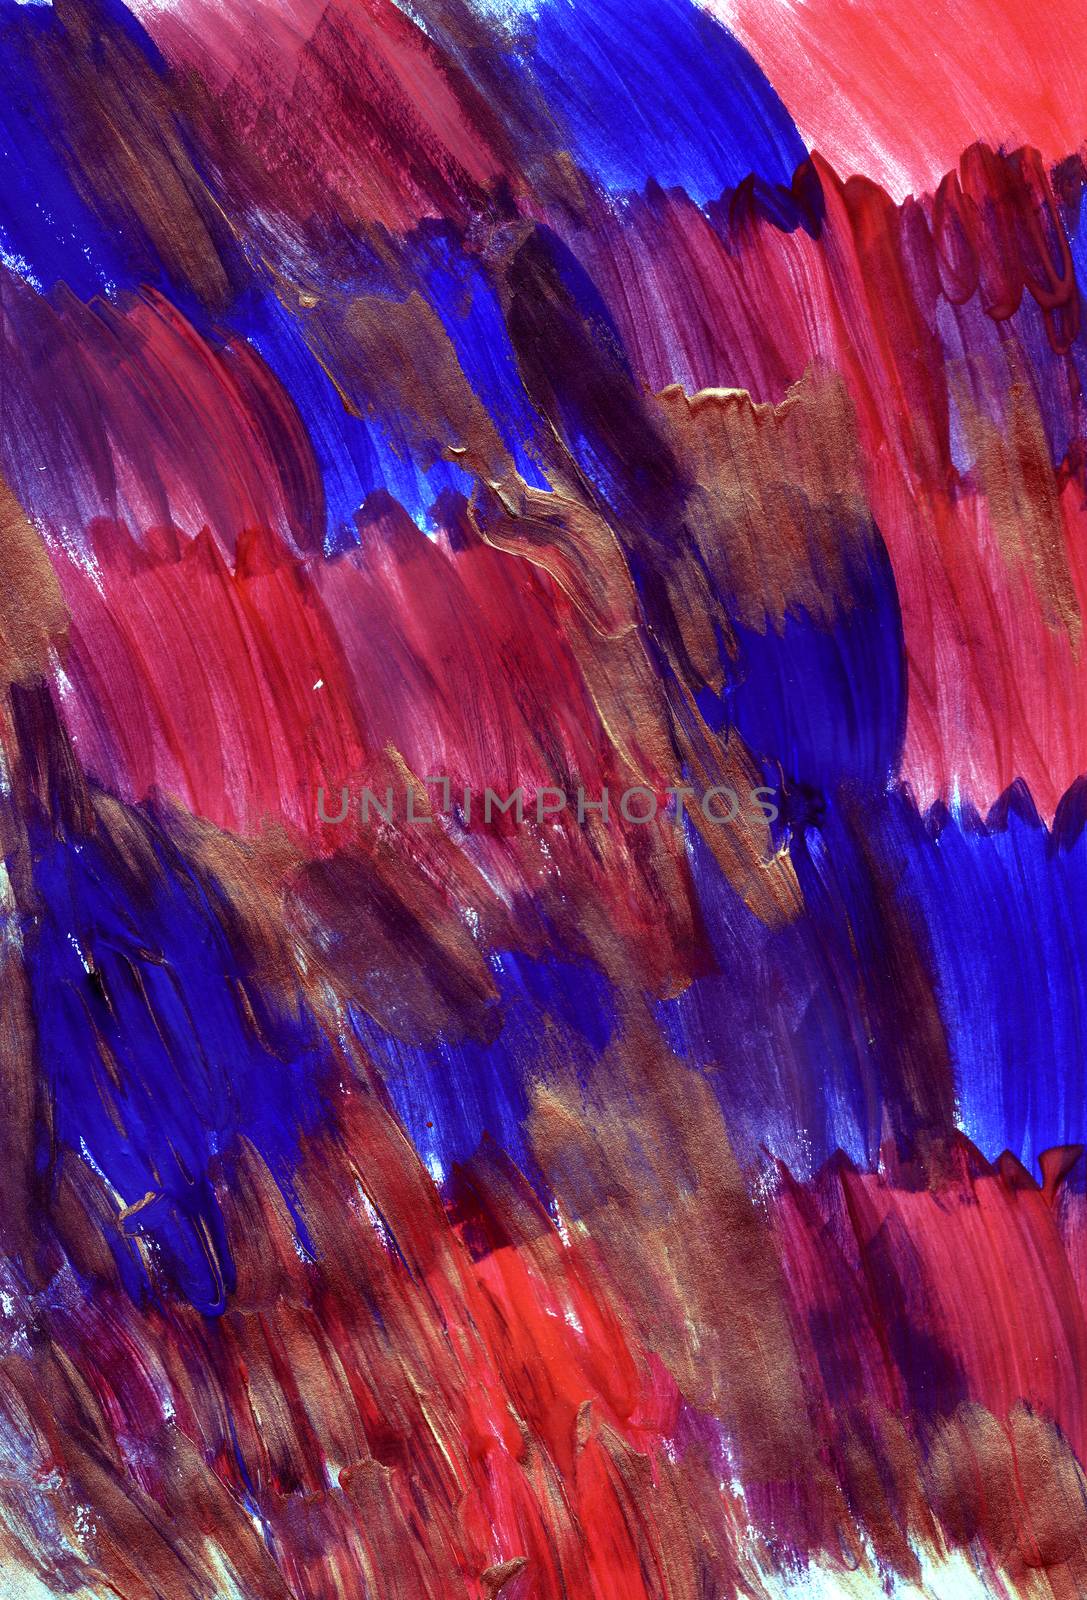 Abstract handdrawn painting, trendy art texture. Modern artwork. Strokes of paint, messy splashes. Contemporary art. Abstract pattern. Unique Texture backdrop painting mix form. Creative natural chaos structure element material creation.